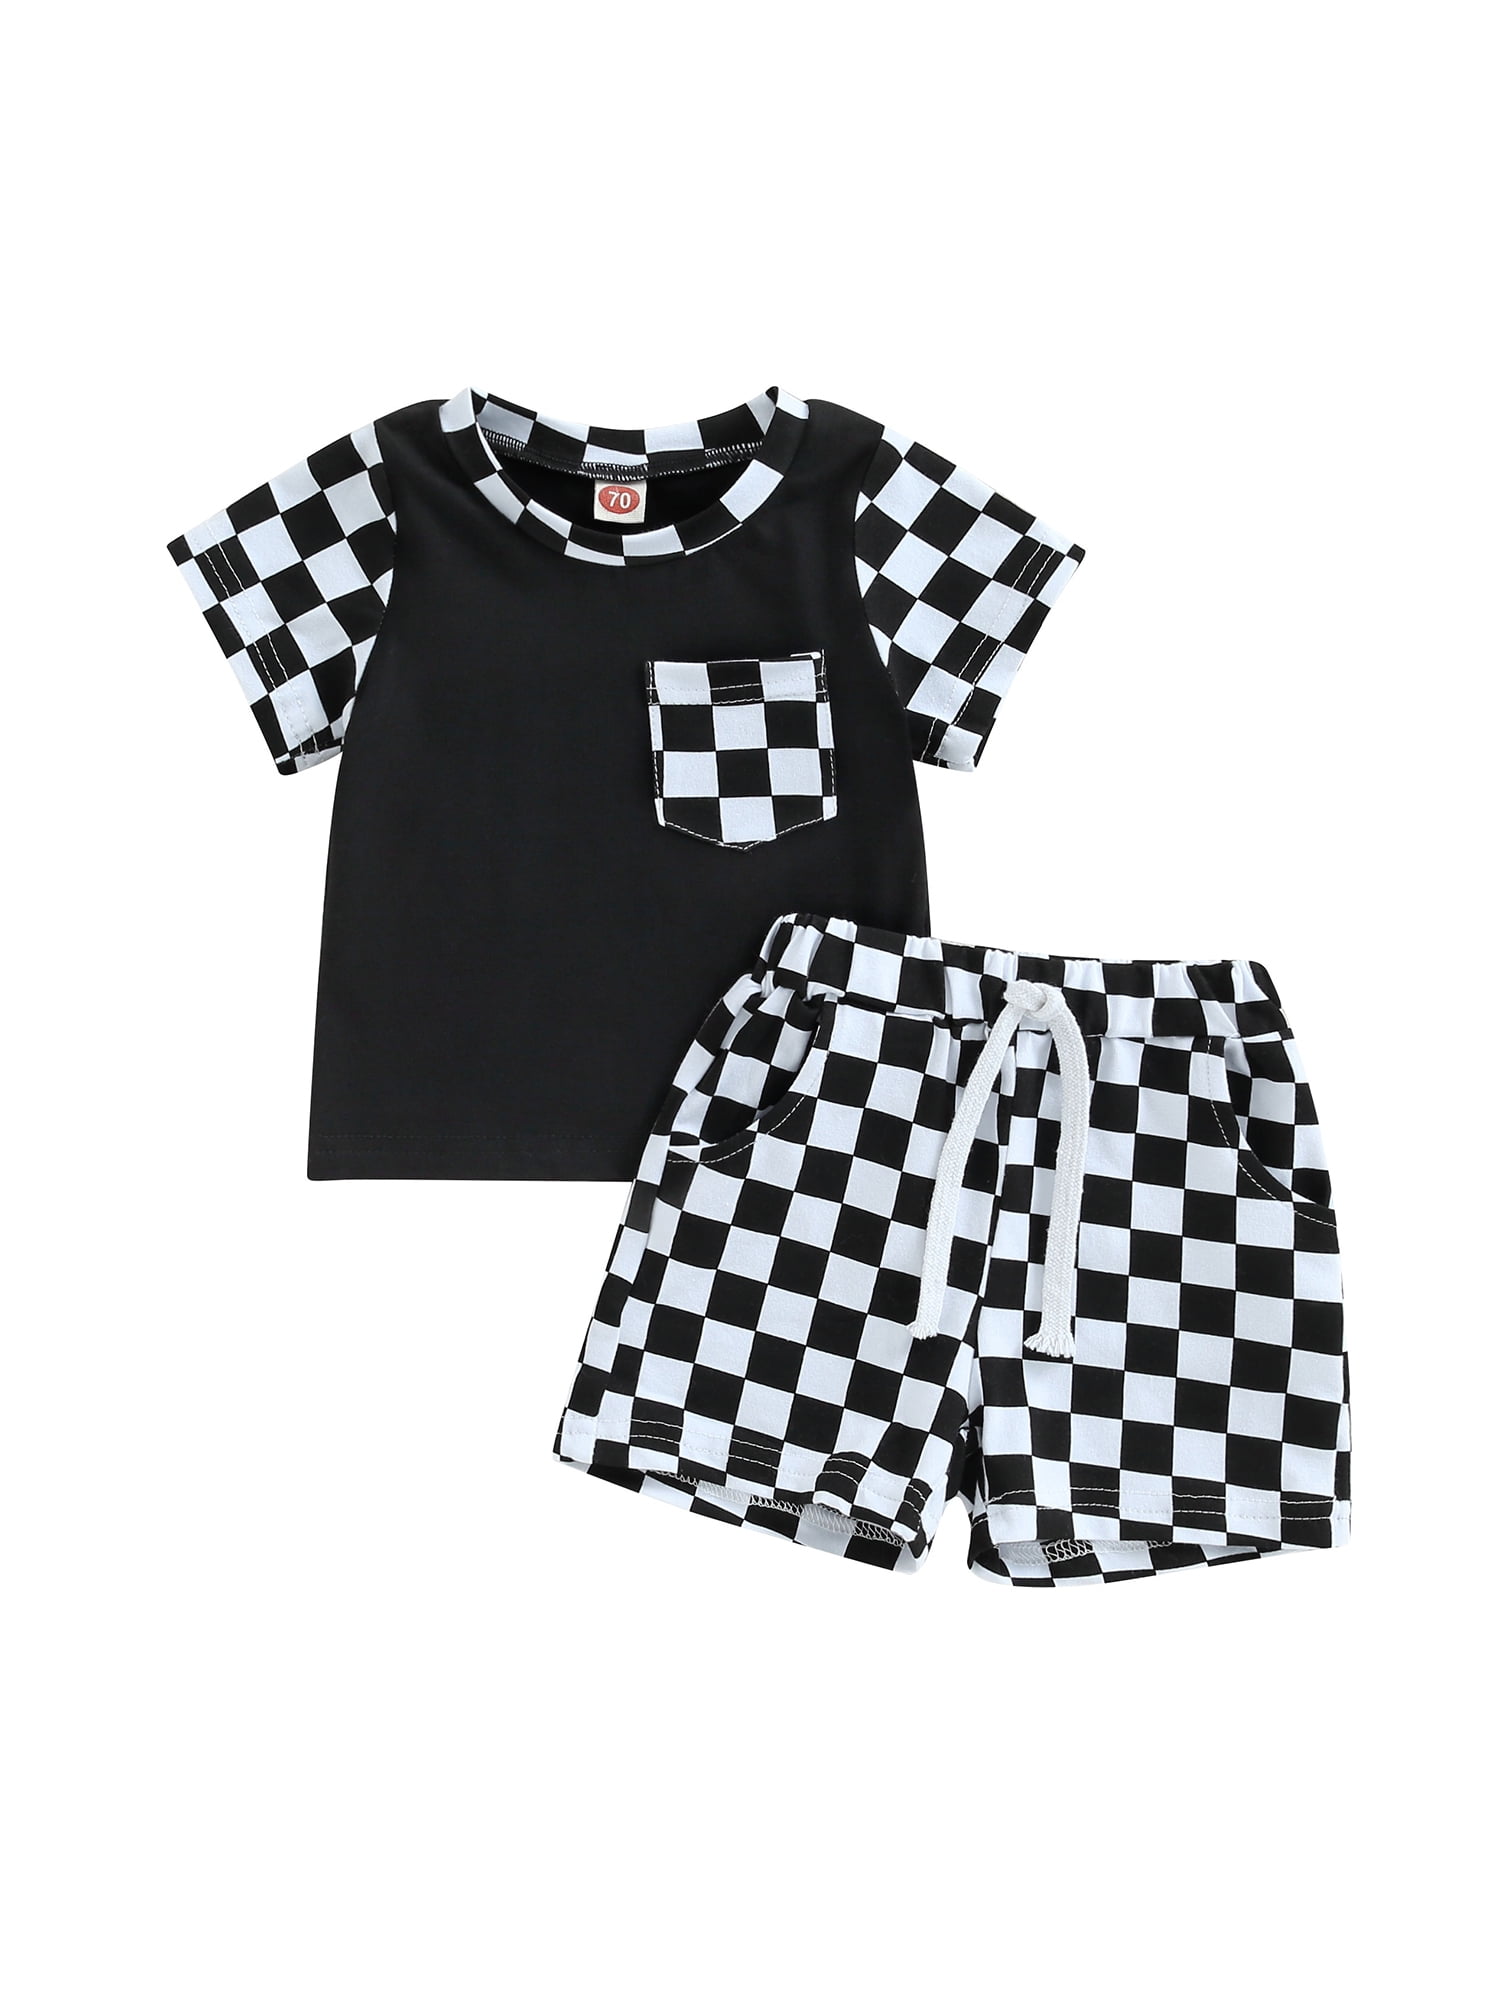 Multitrust Toddler Baby Boys Checkerboard Plaid Print Short Sleeve Button Down Shirts and Shorts Set Summer Outfits 0-24 Months, Infant Boy's, Size: 6